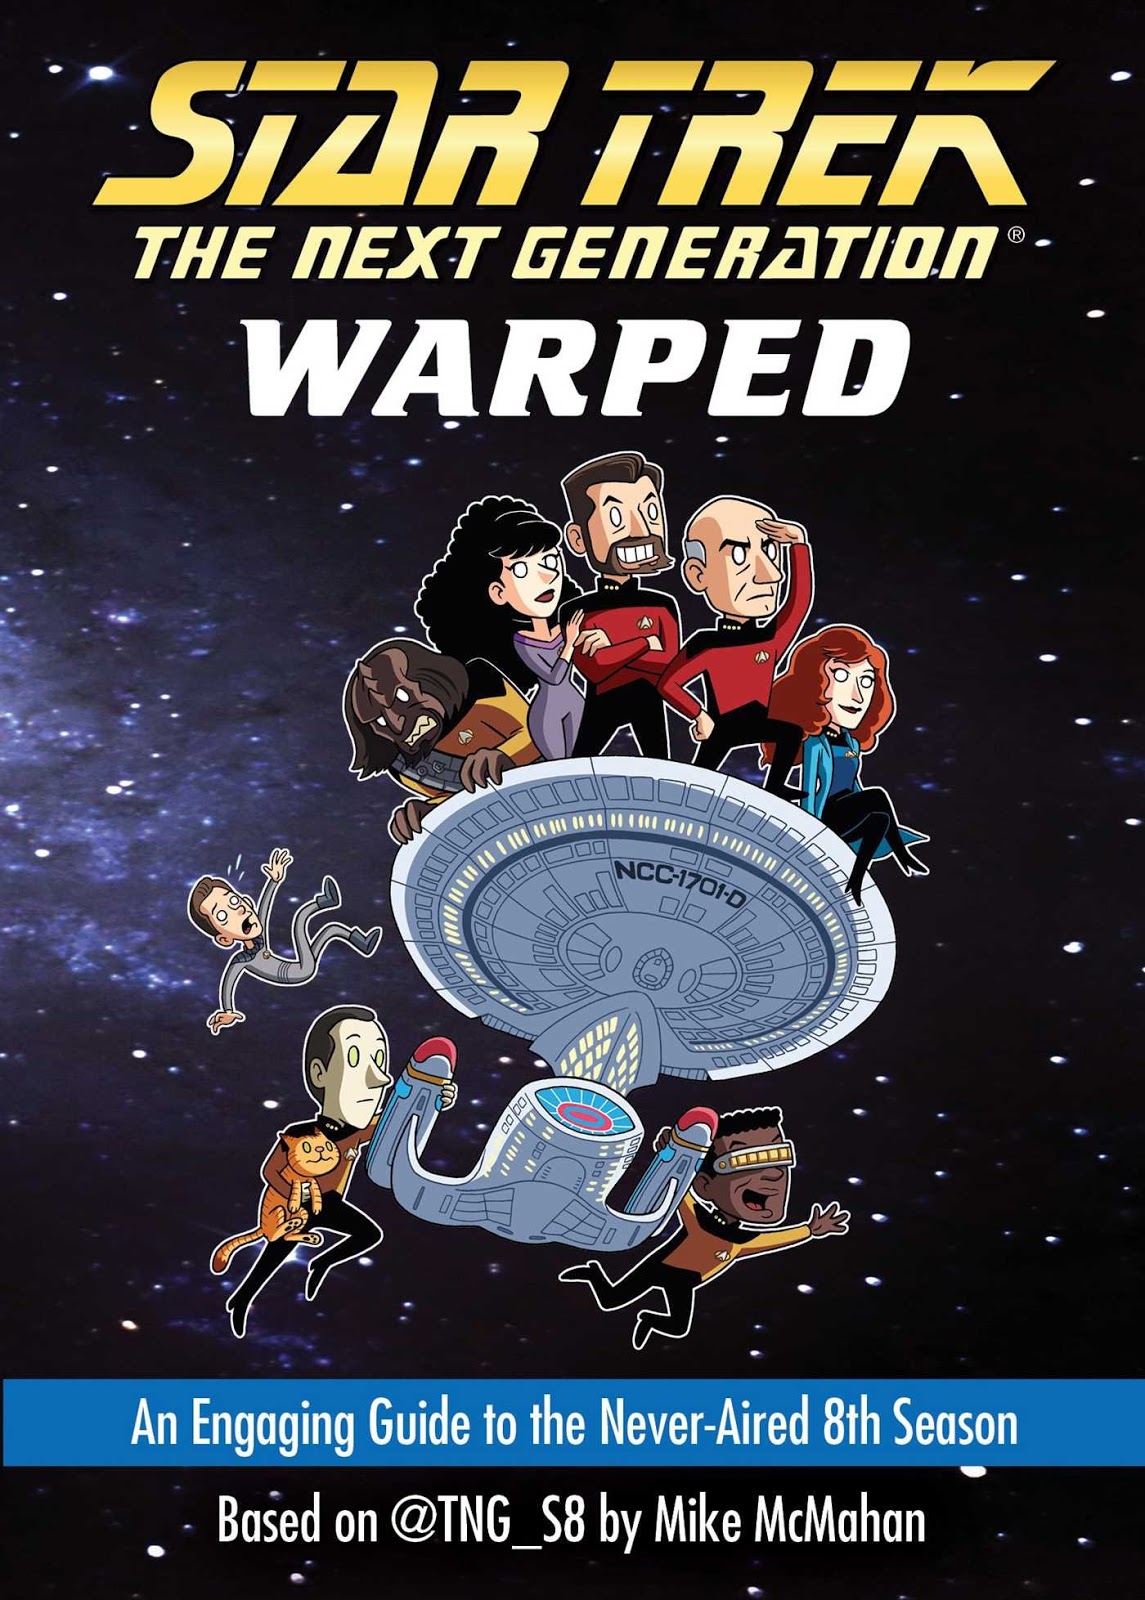 New Trek Animated Series Announced by author of “Star Trek: The Next Generation: Warped: An Engaging Guide to the Never-Aired 8th Season”